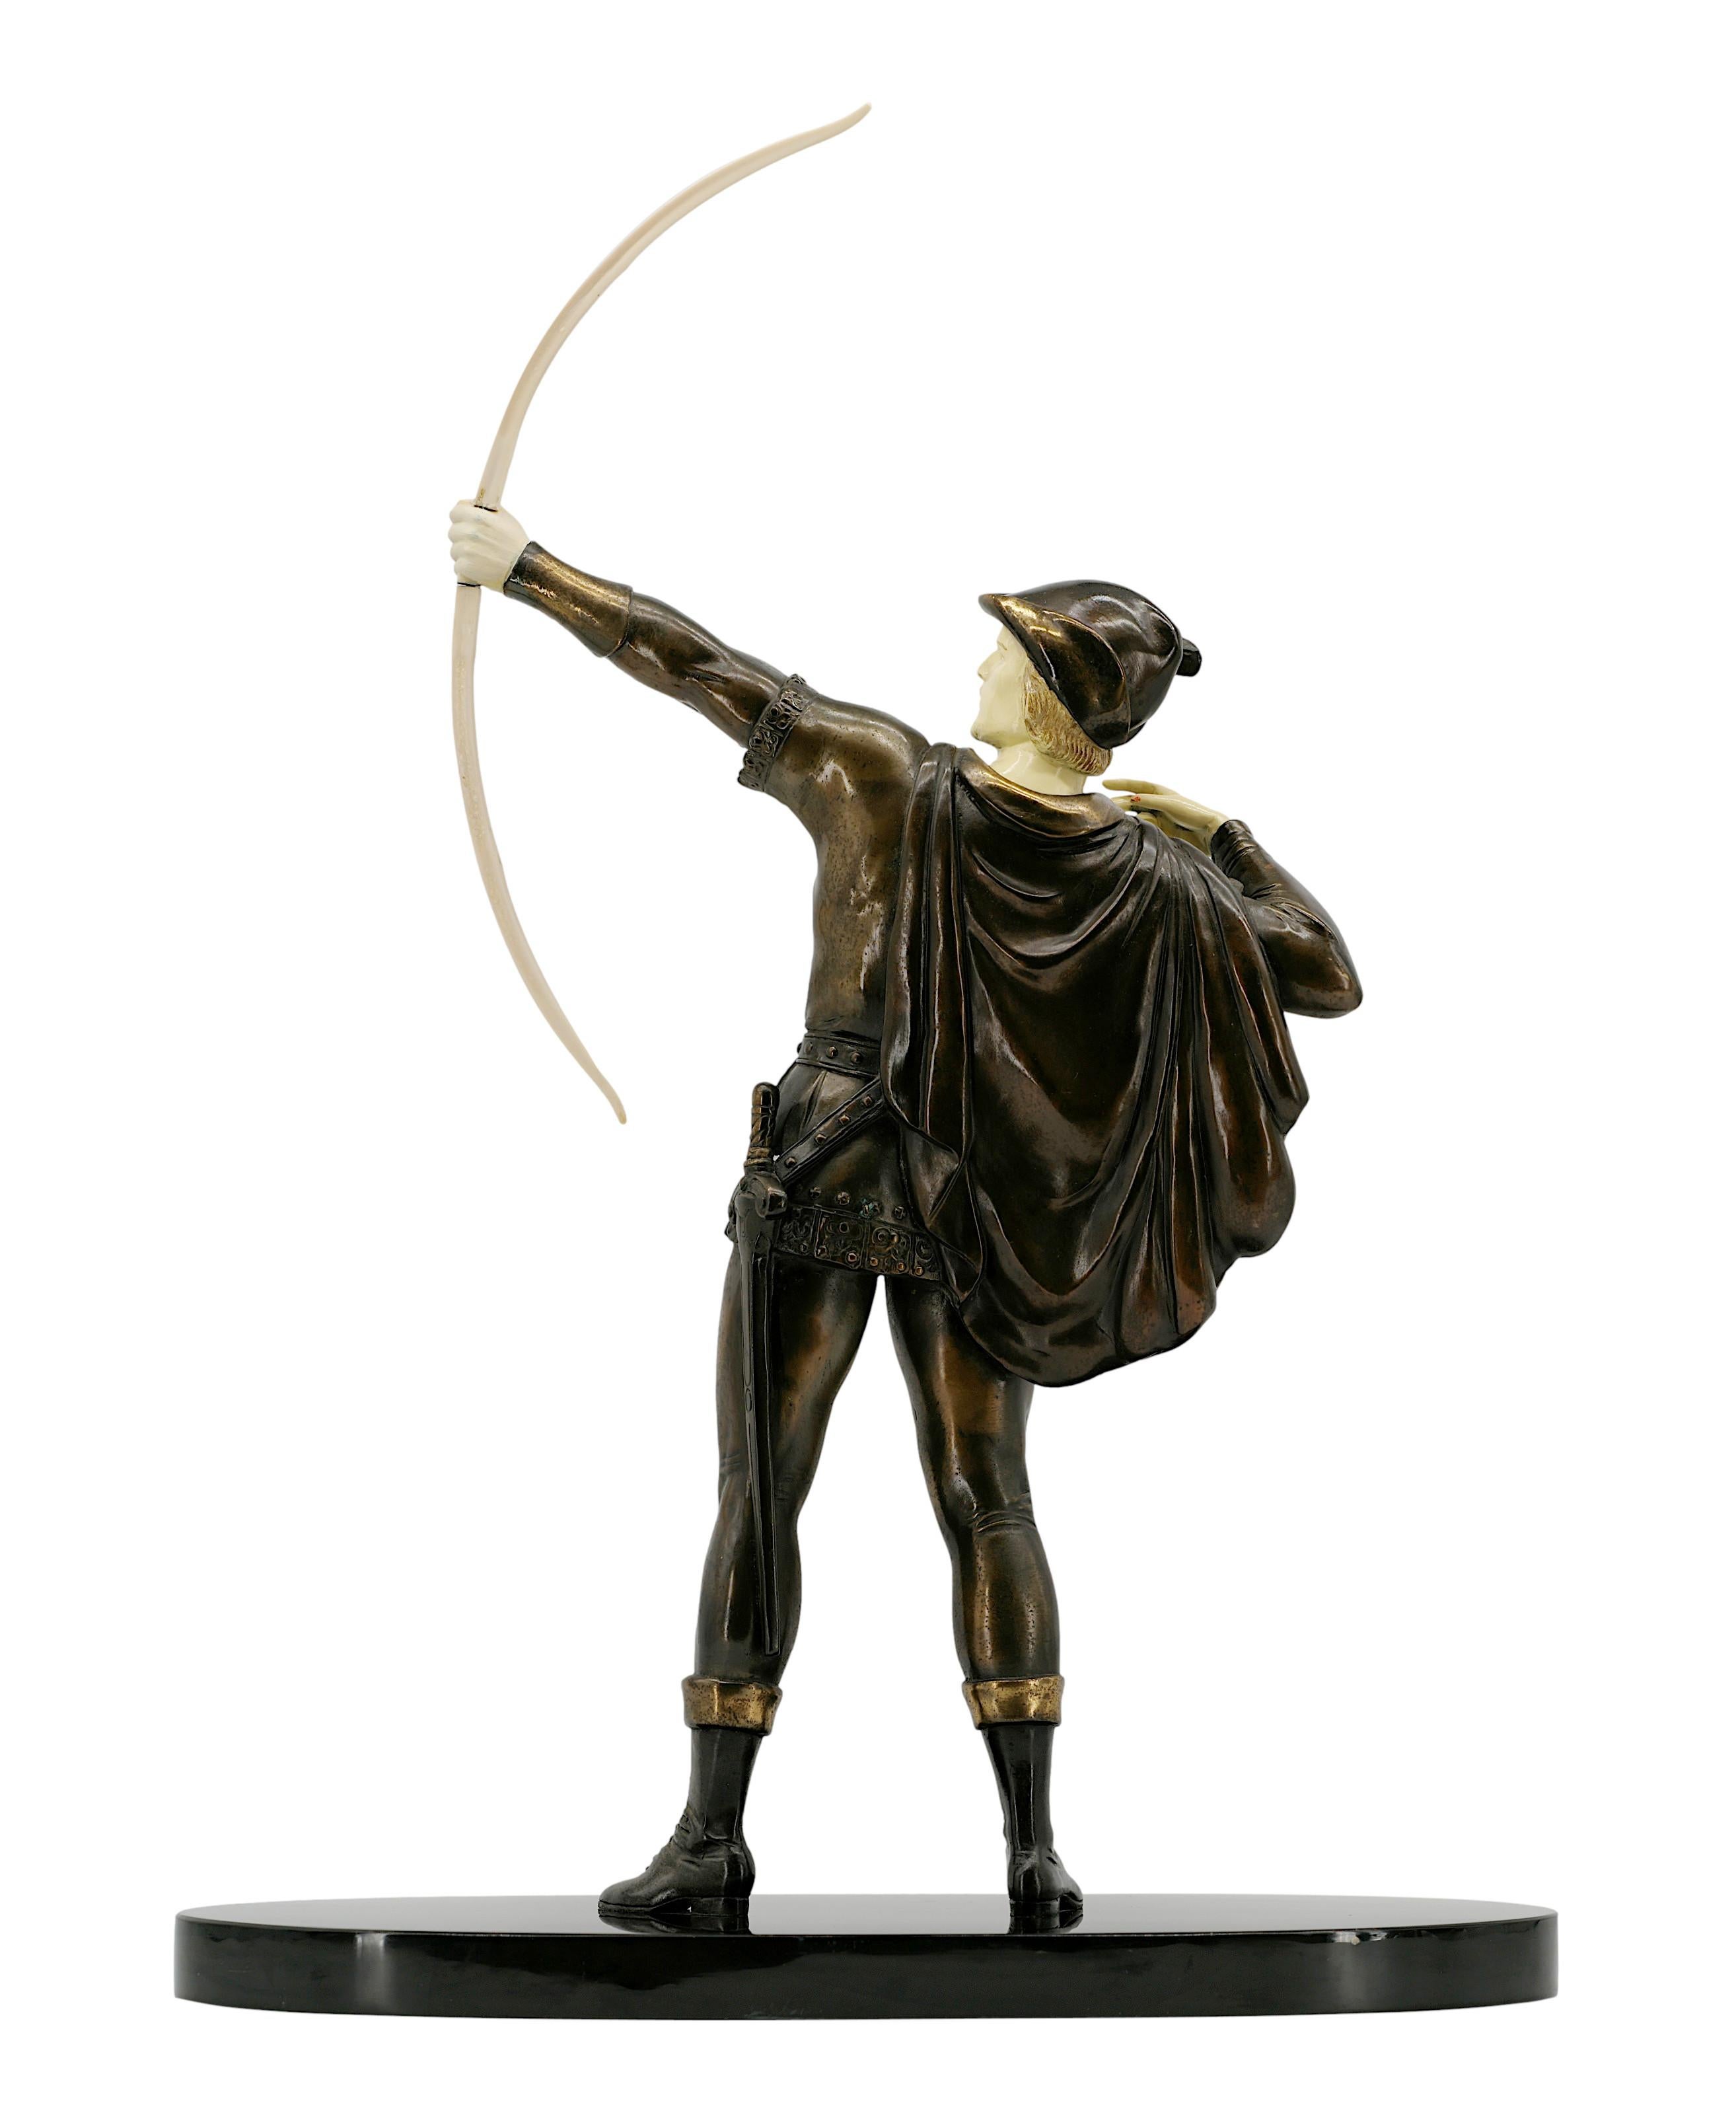 French Art Deco Robin Hood Sculpture, 1930s For Sale 1